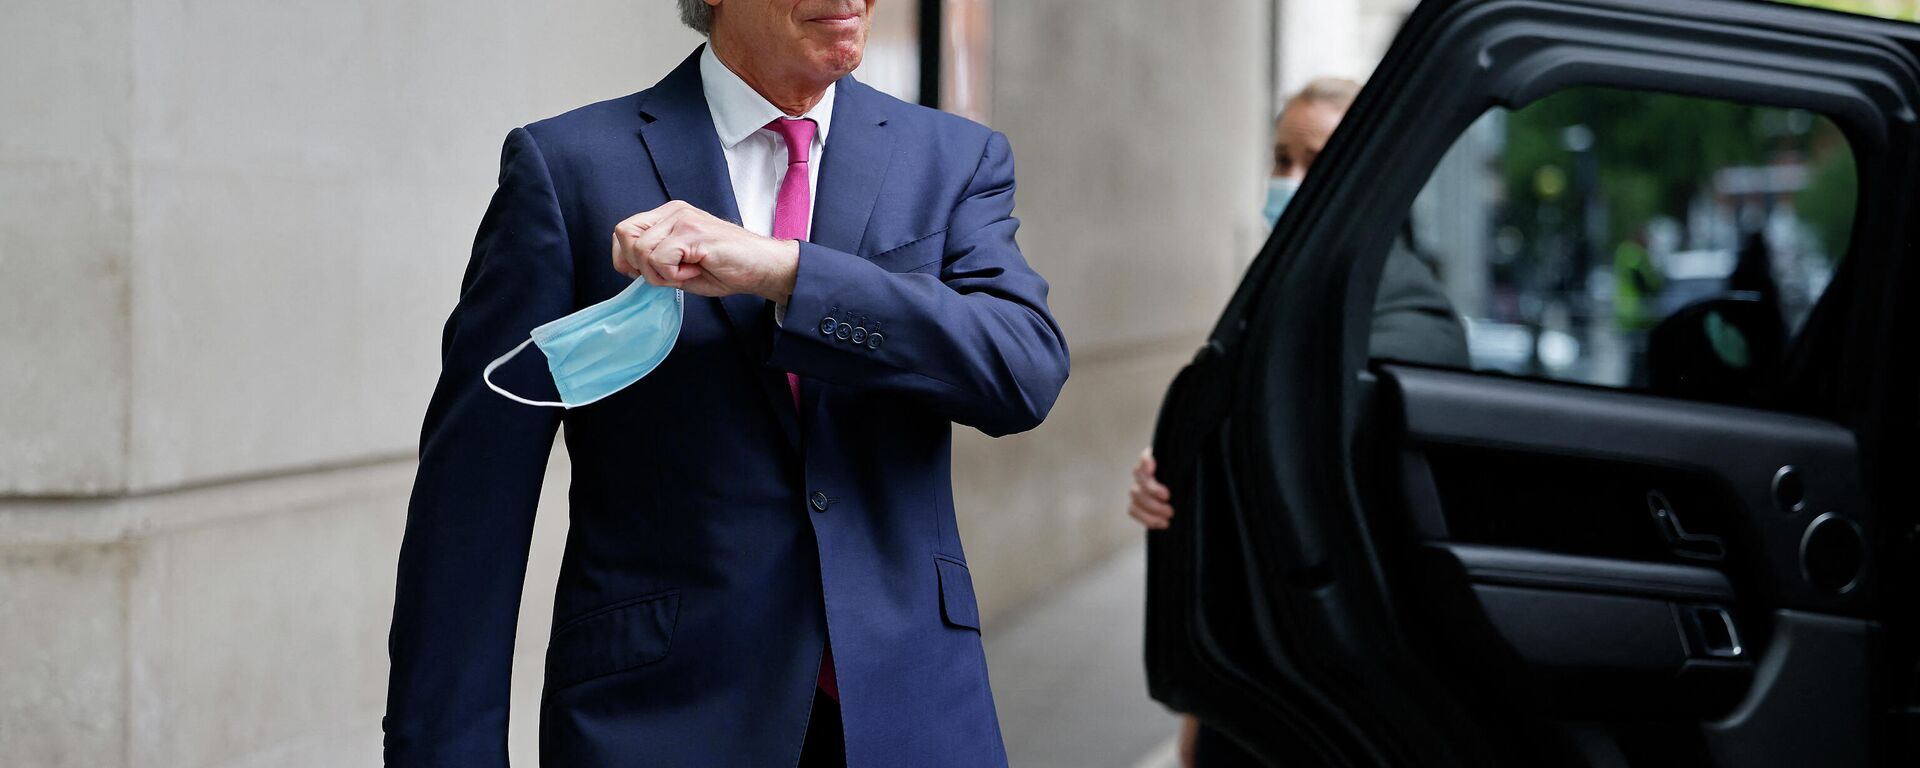 Former British Prime Minister Tony Blair, removes his disposable face covering worn due to Covid-19, to pose for a photograph as he leaves the BBC in central London on June 6, 2021, after appearing on the BBC political programme The Andrew Marr Show - Sputnik International, 1920, 06.01.2022